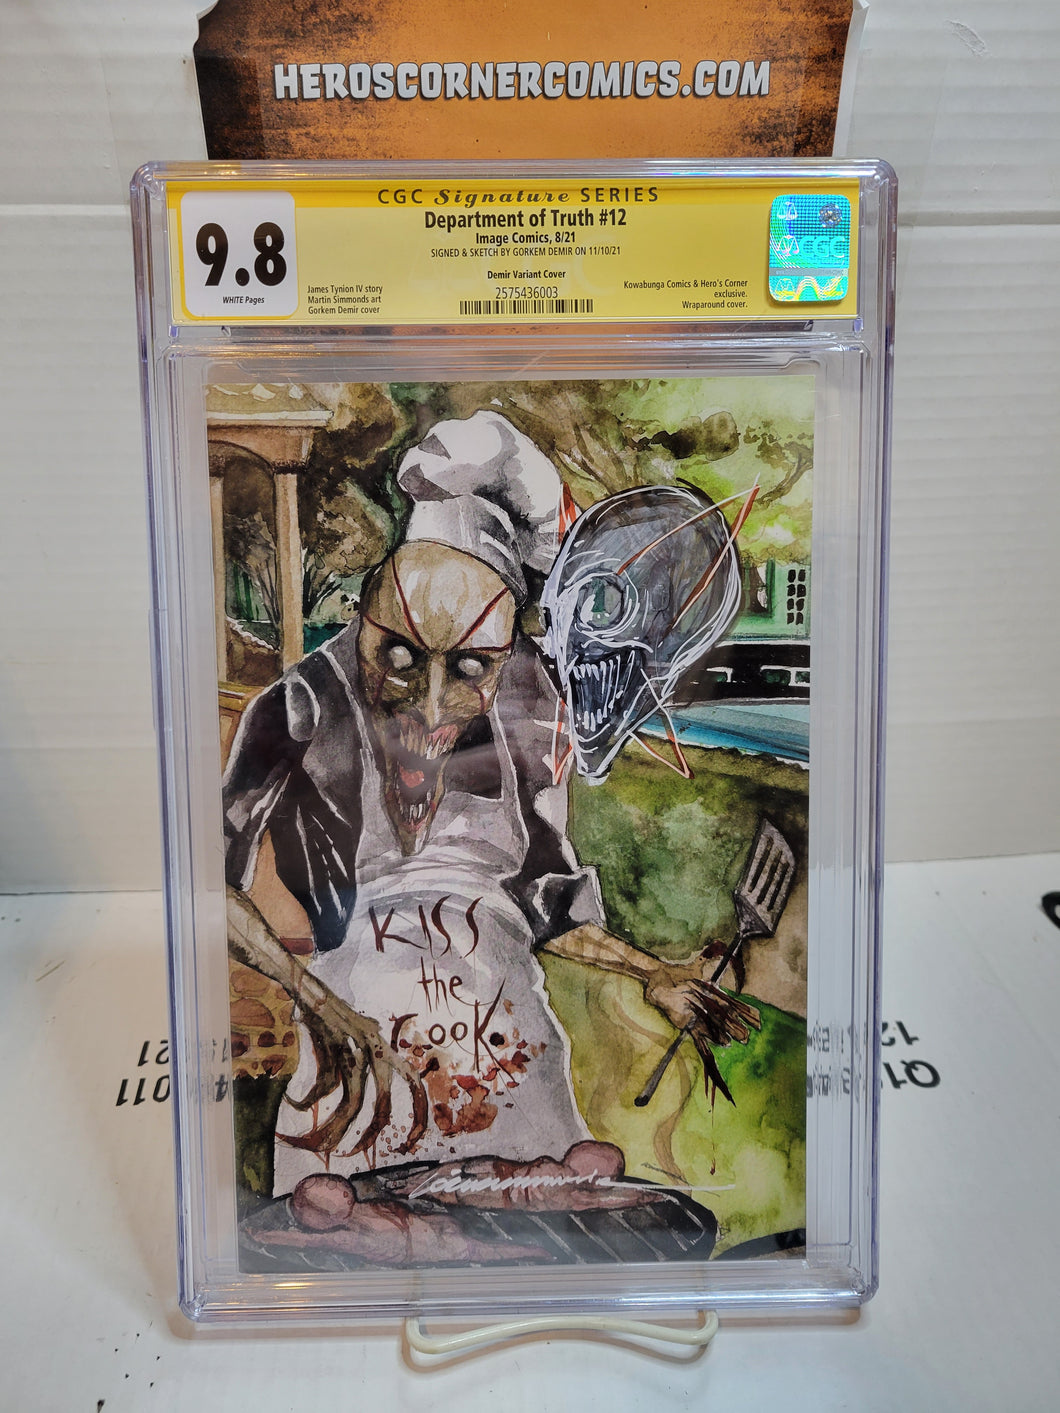 Department of Truth 12 Gorkem Demir CGC 9.8 SS Signed and Remarked